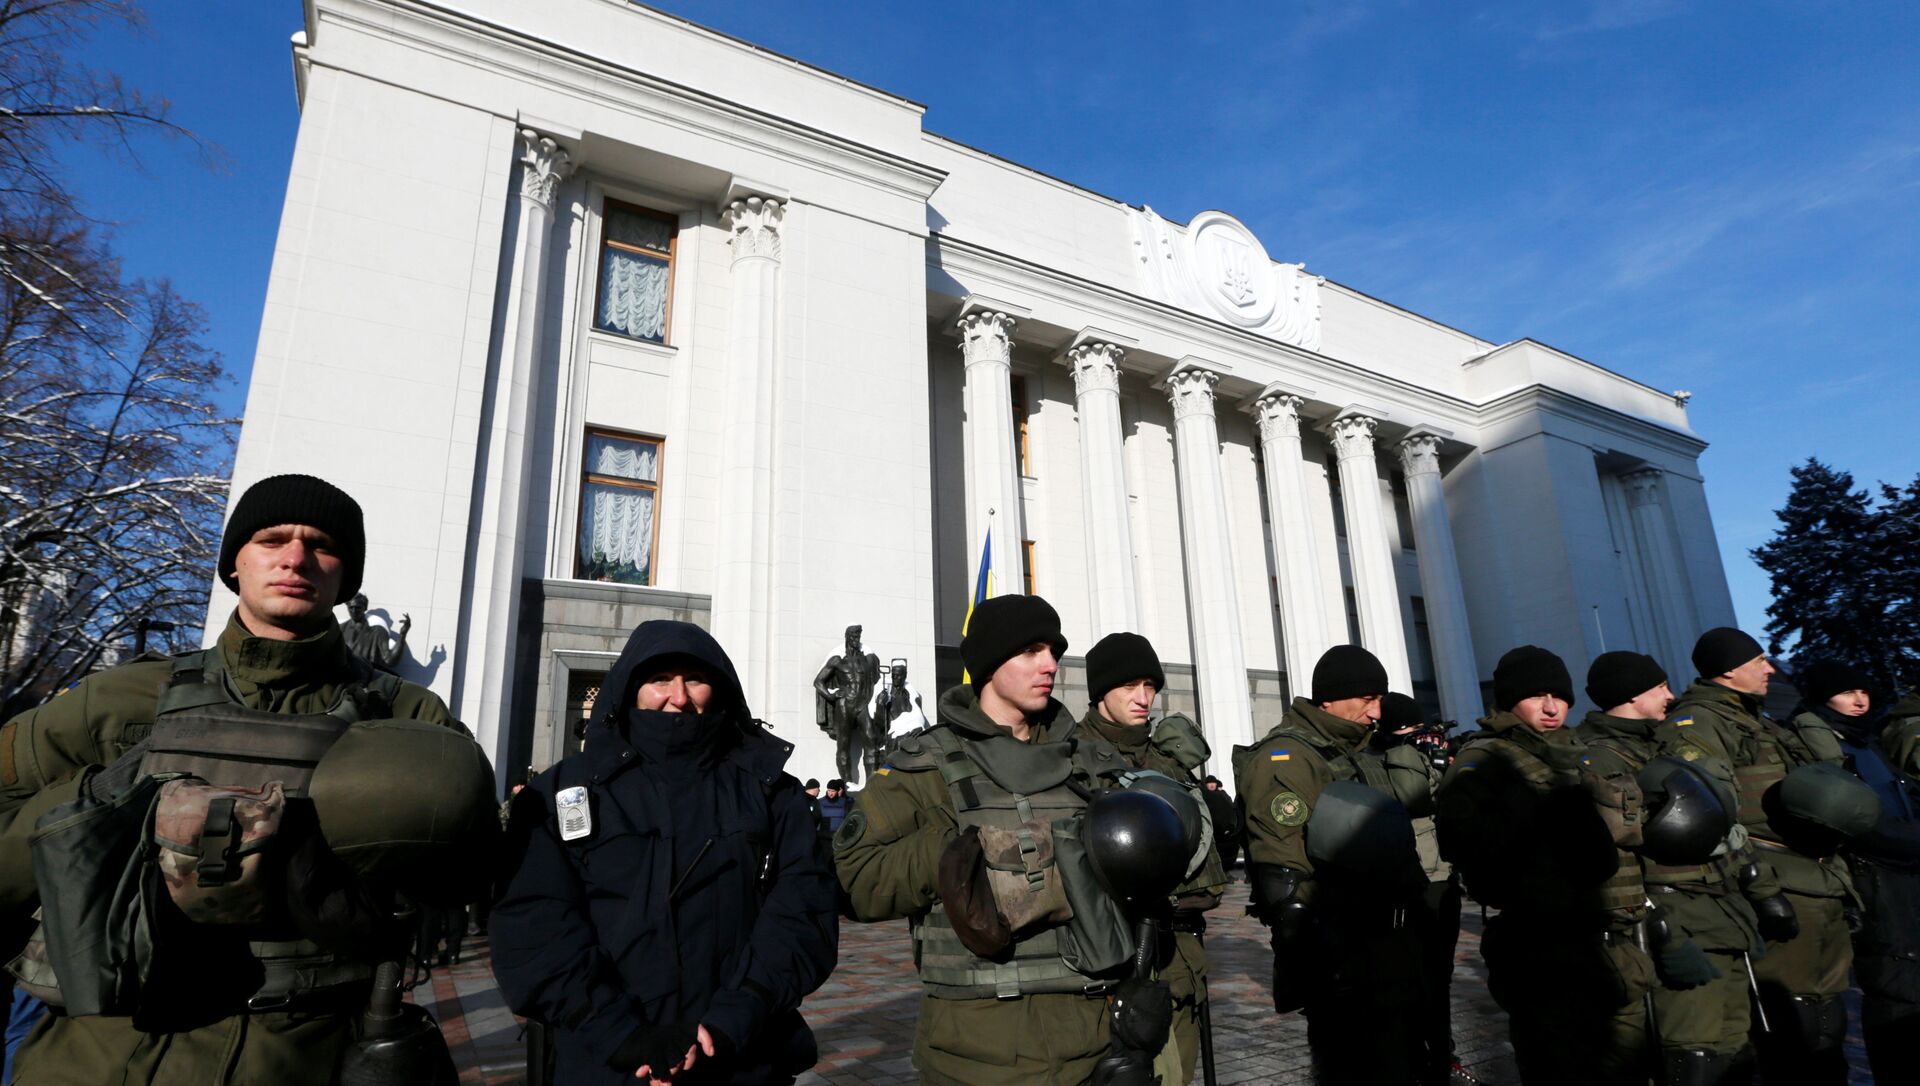 Members of the National Guard stand guard during a rally of depositors of failed Ukrainian banks who demand compensation of their deposits, in front of the parliament building in Kiev, Ukraine, November 15, 2016 - Sputnik International, 1920, 14.07.2021